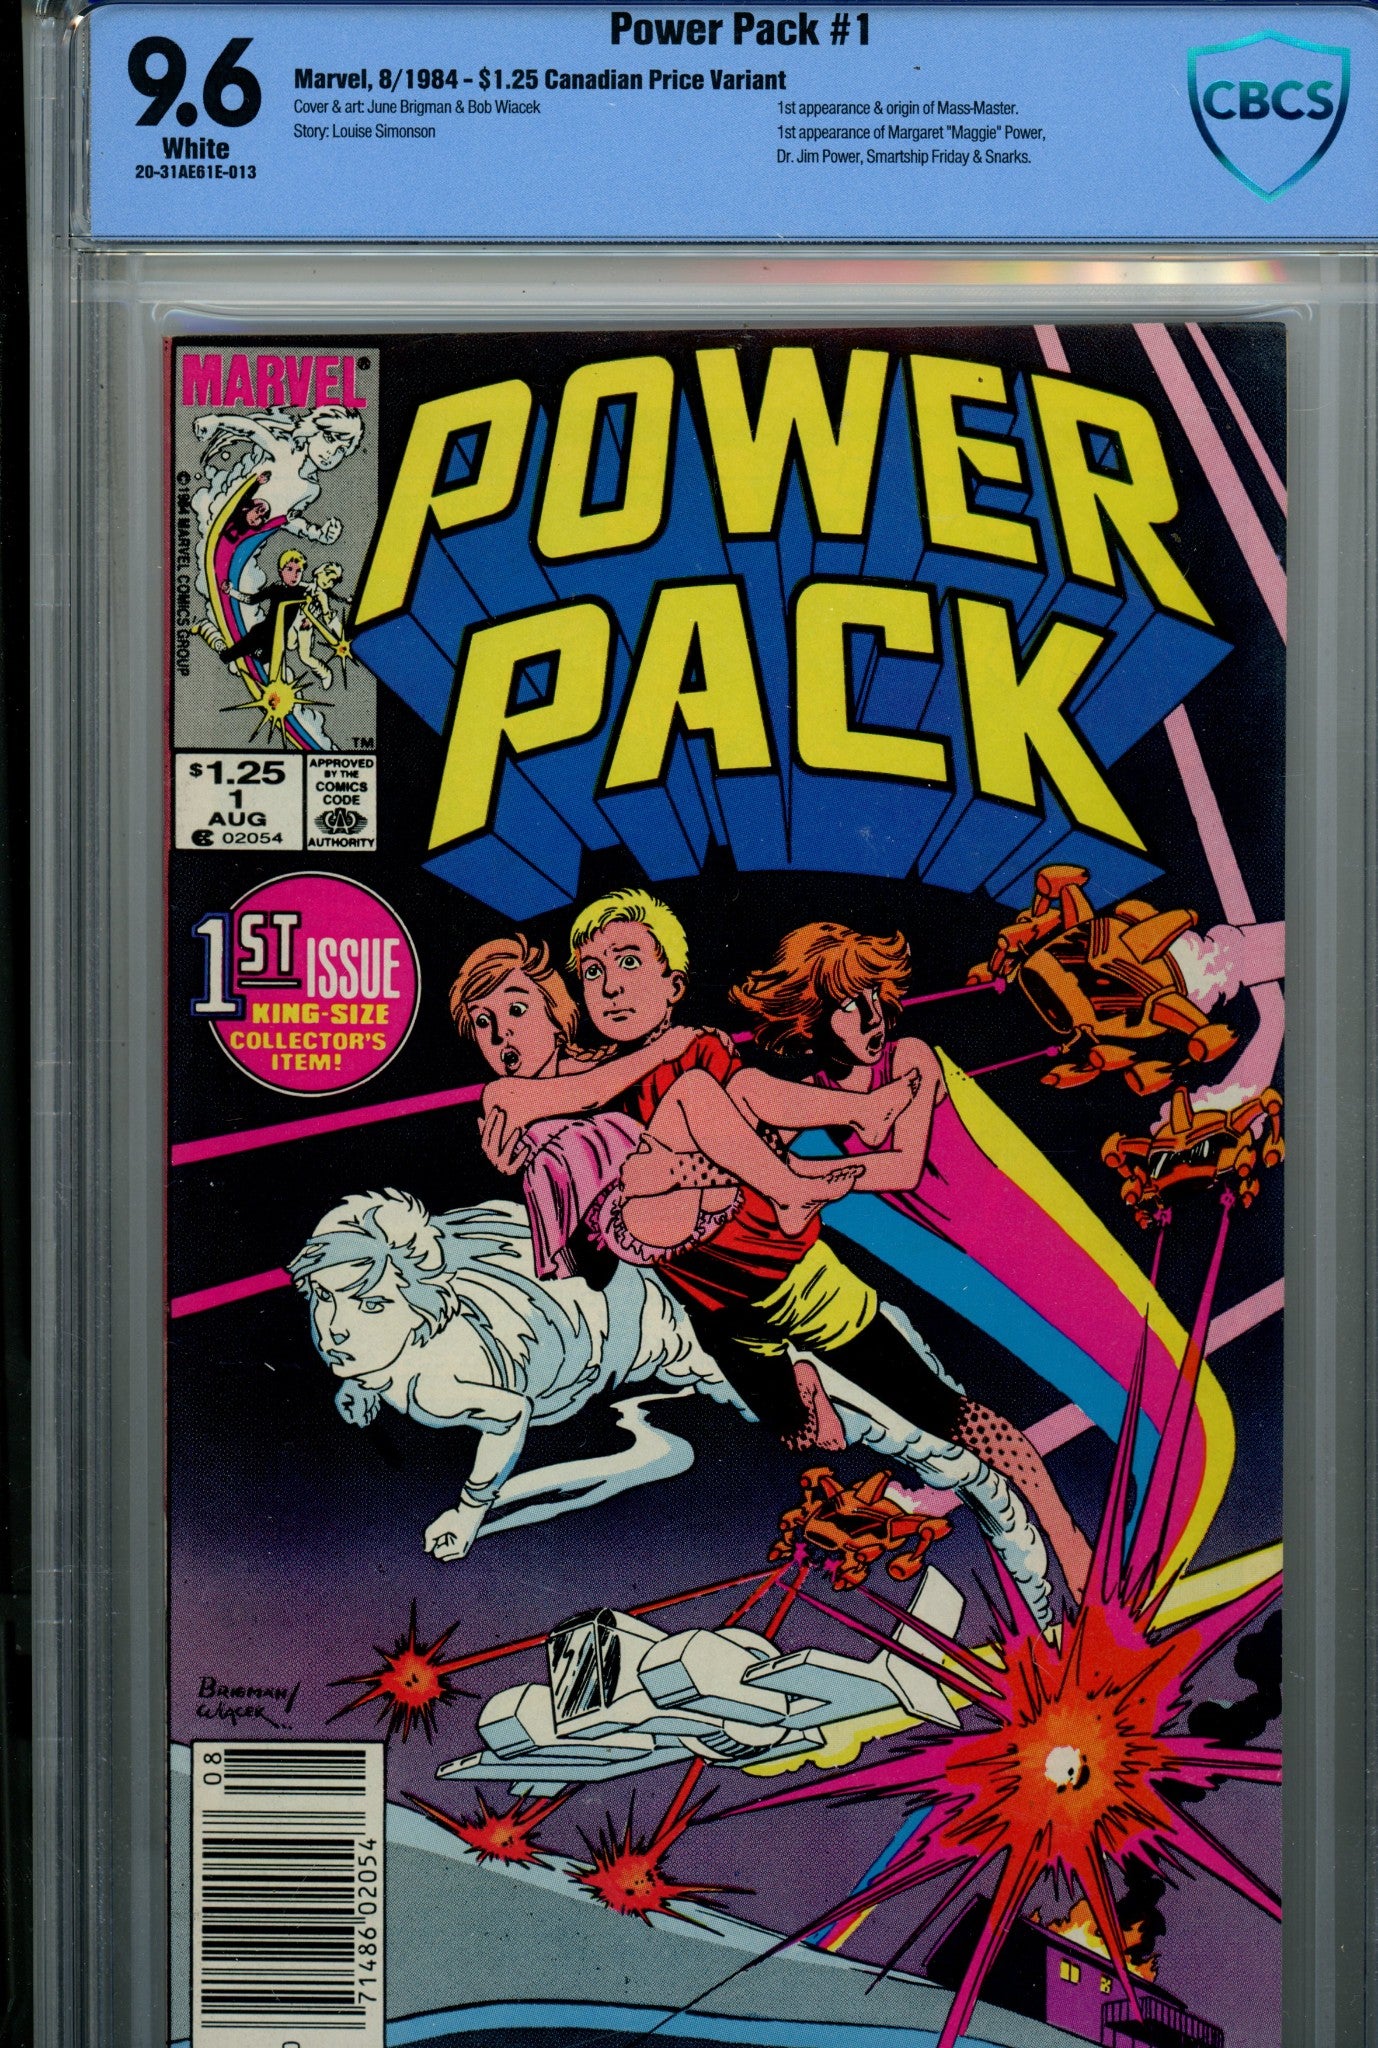 Power Pack Vol 1 1 Canadian Price Variant CBCS NM+ (9.6) (1984)